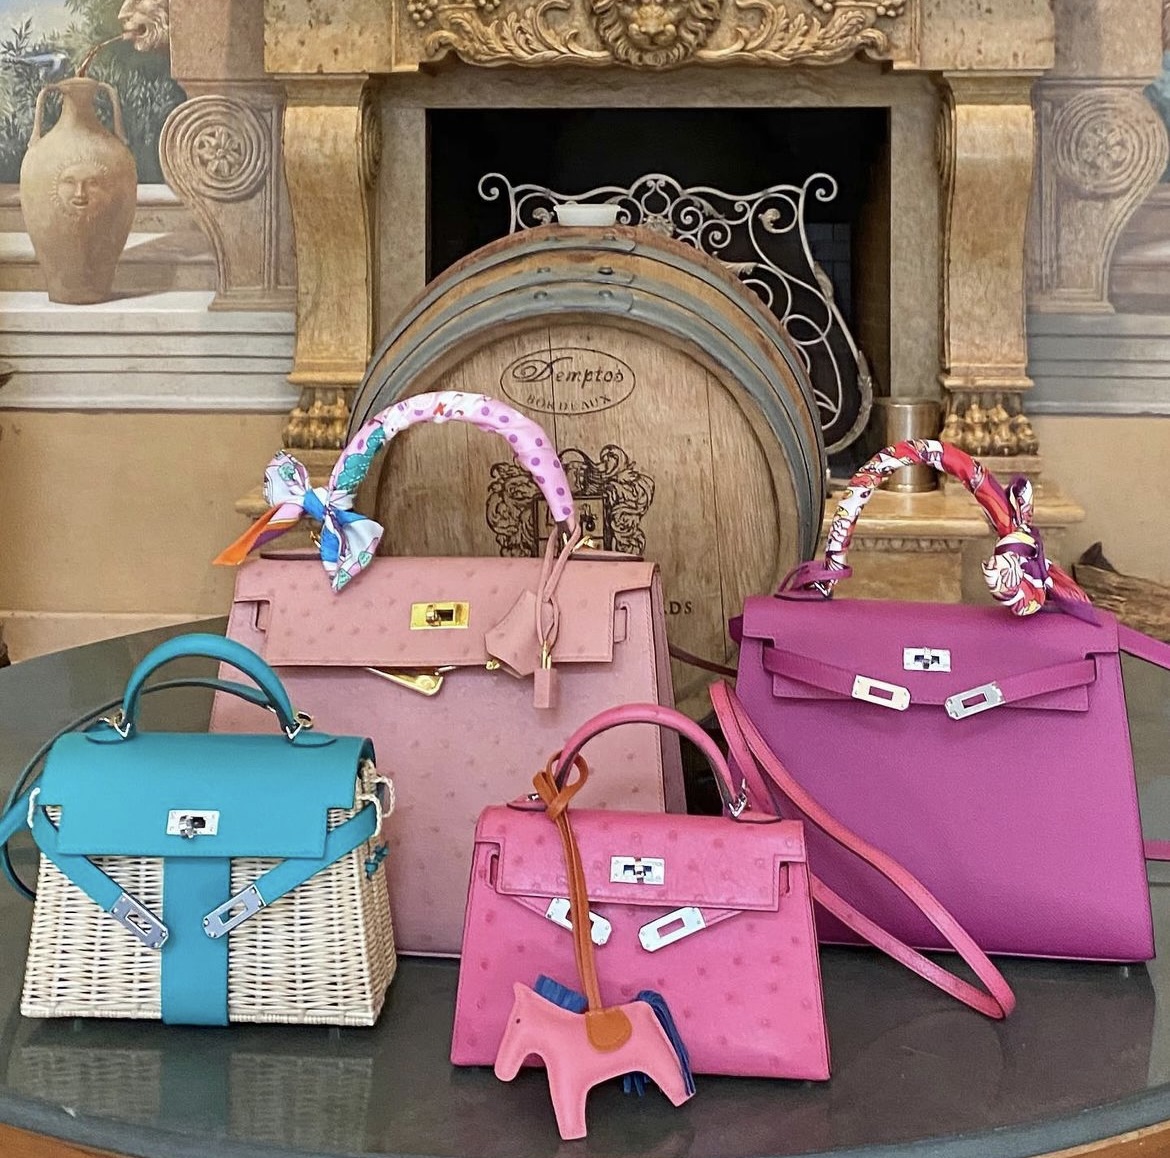 Finding a New Home for Your Birkin - PurseBop